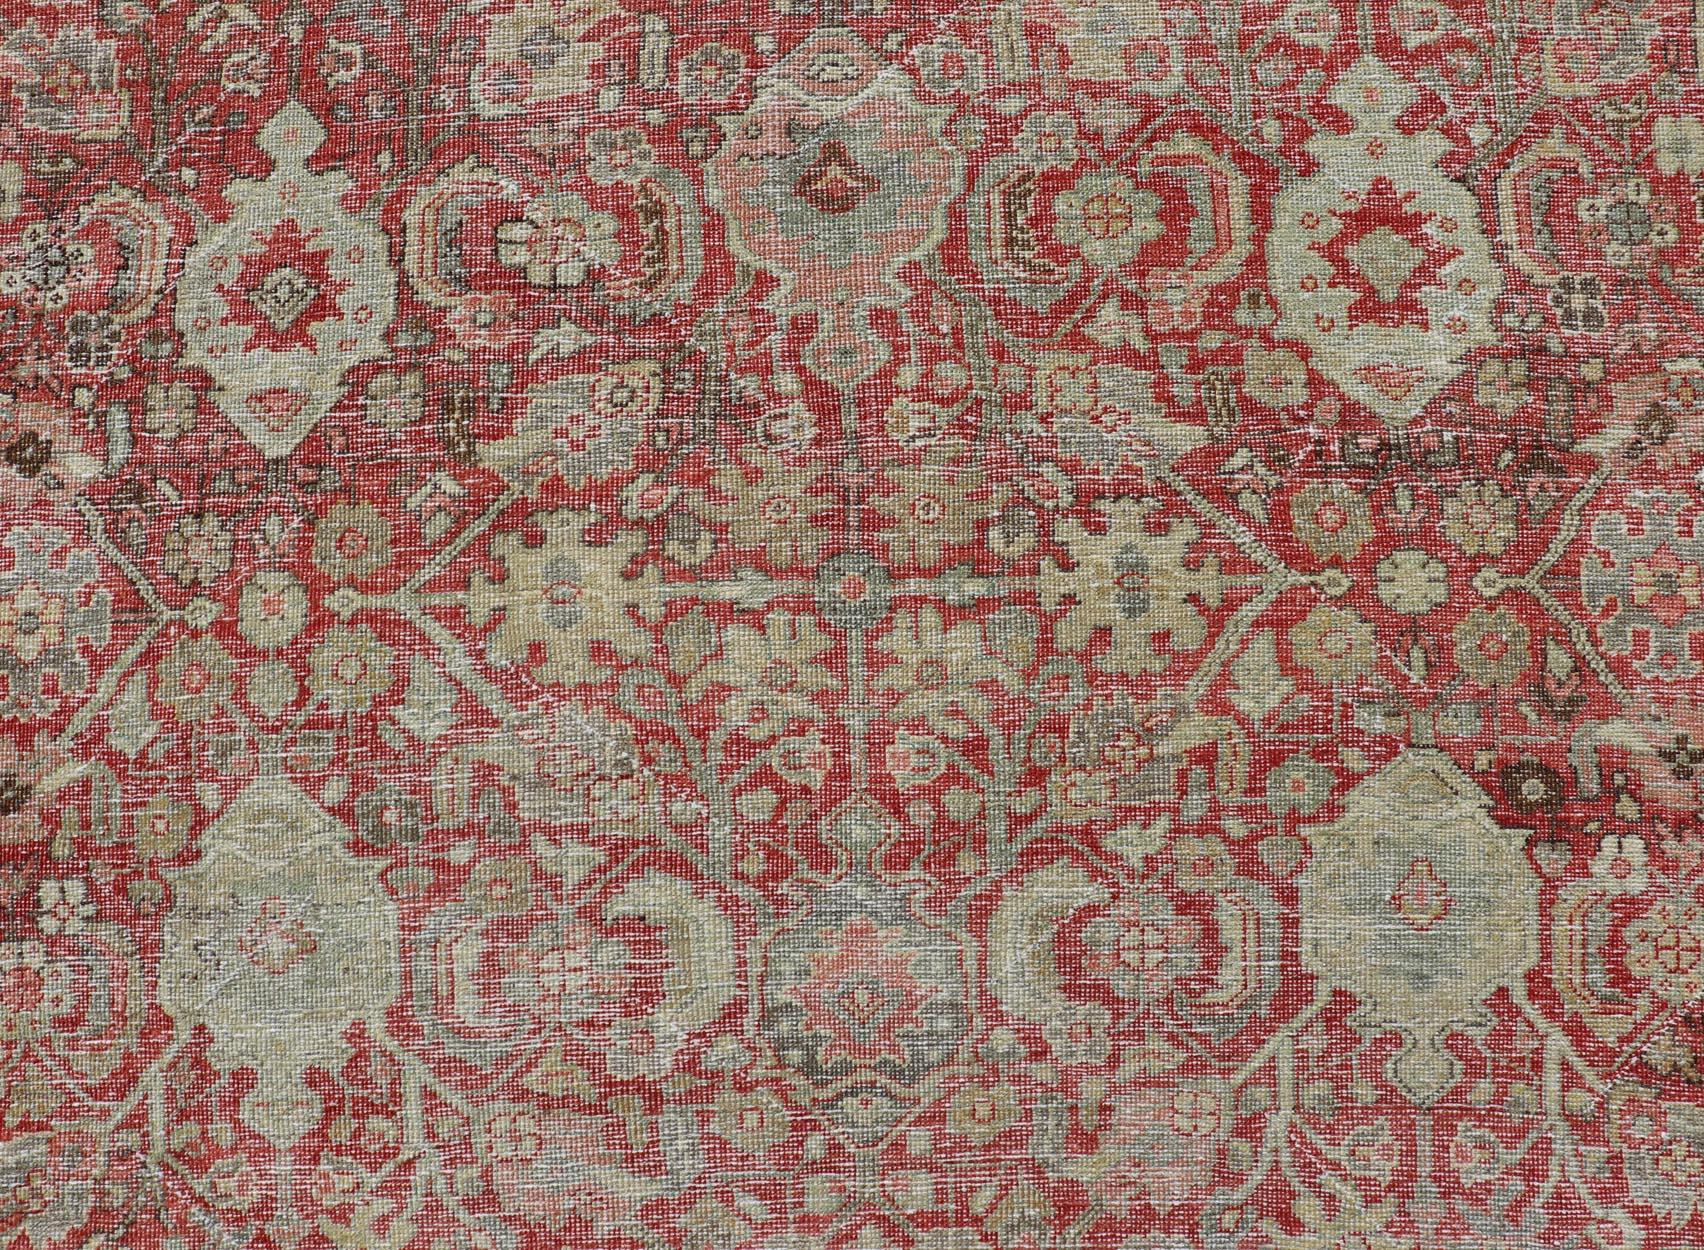 Antique Persian Colorful Mahal Rug with All over Floral Design on a Red Field  For Sale 4